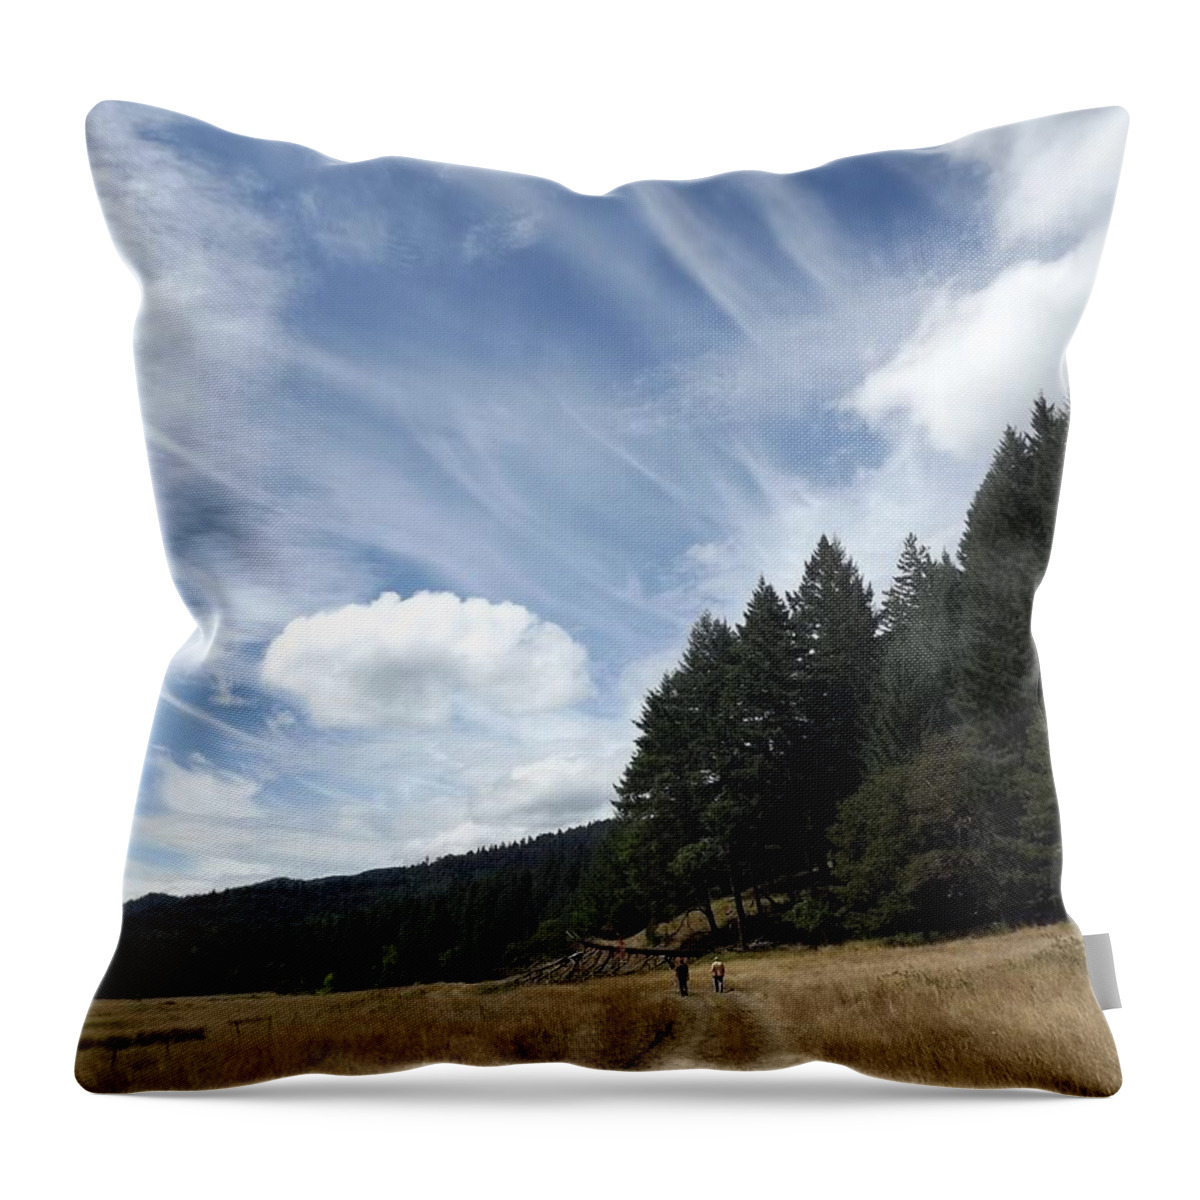 Clouds Throw Pillow featuring the photograph Two Of A Kind by Richard Faulkner